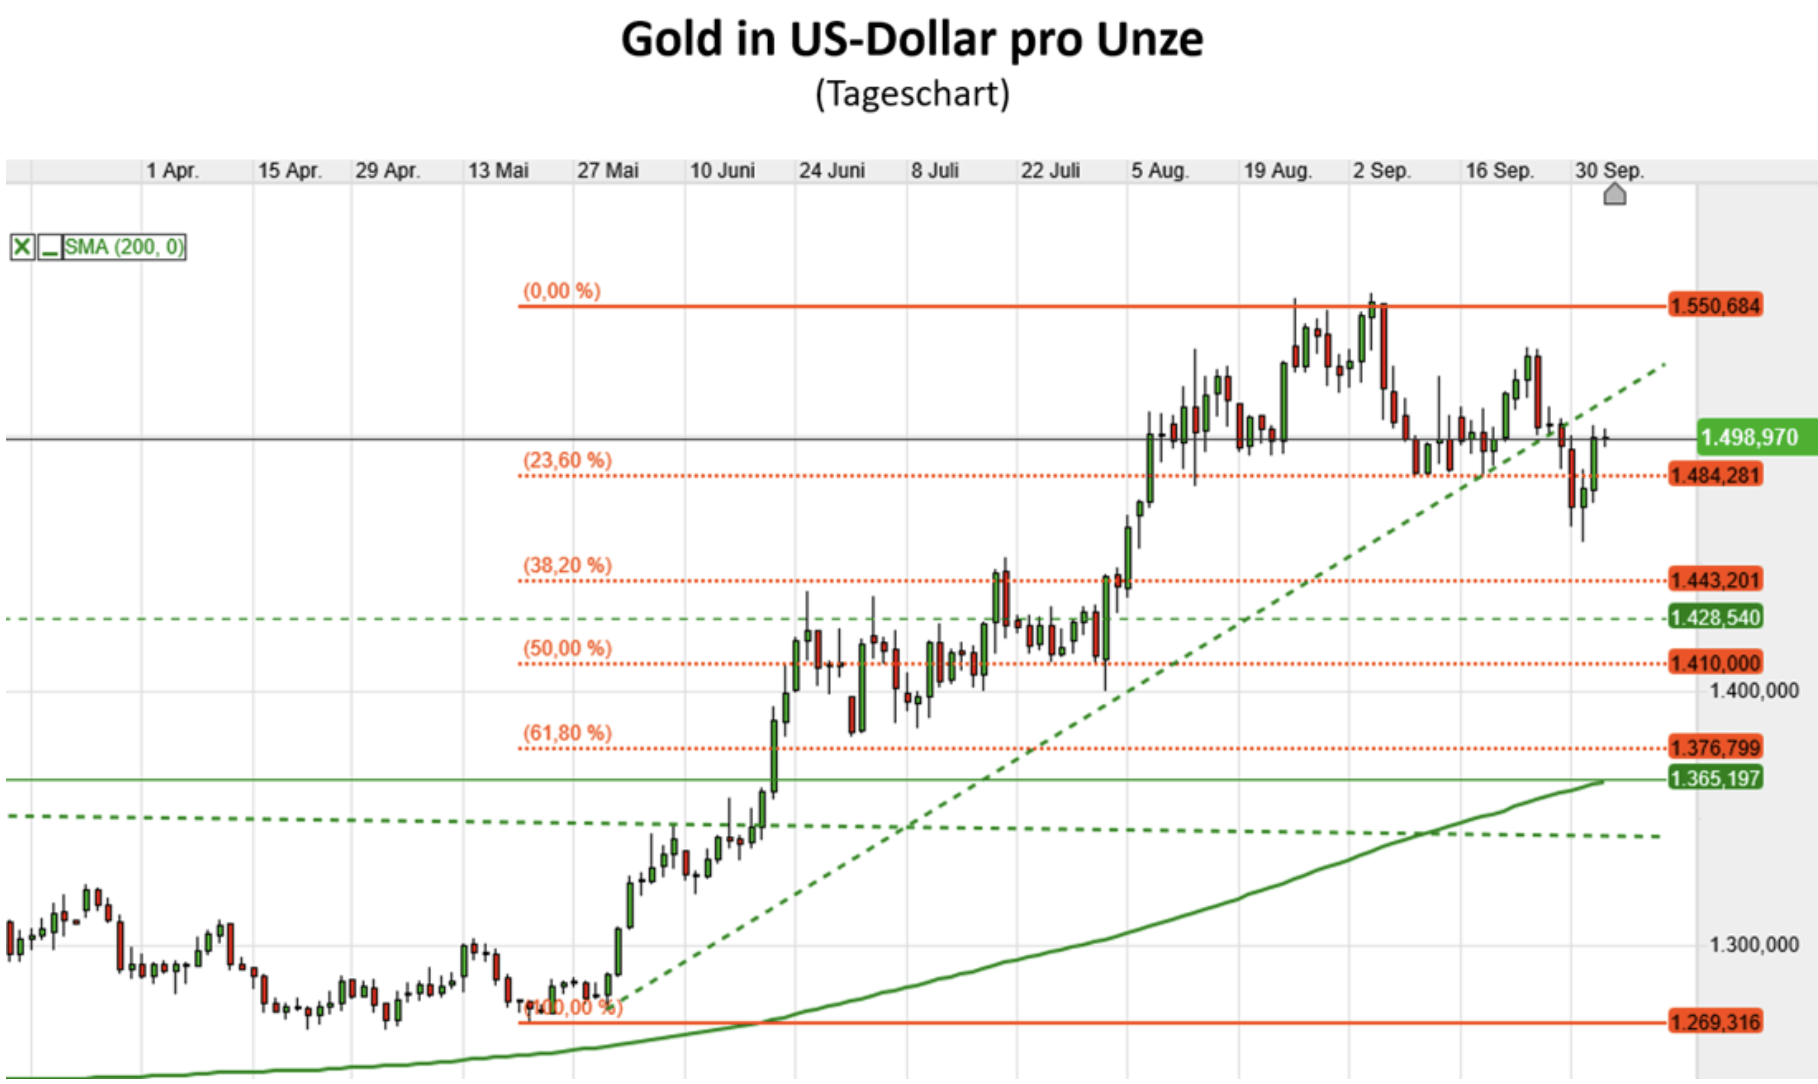 Gold in USD